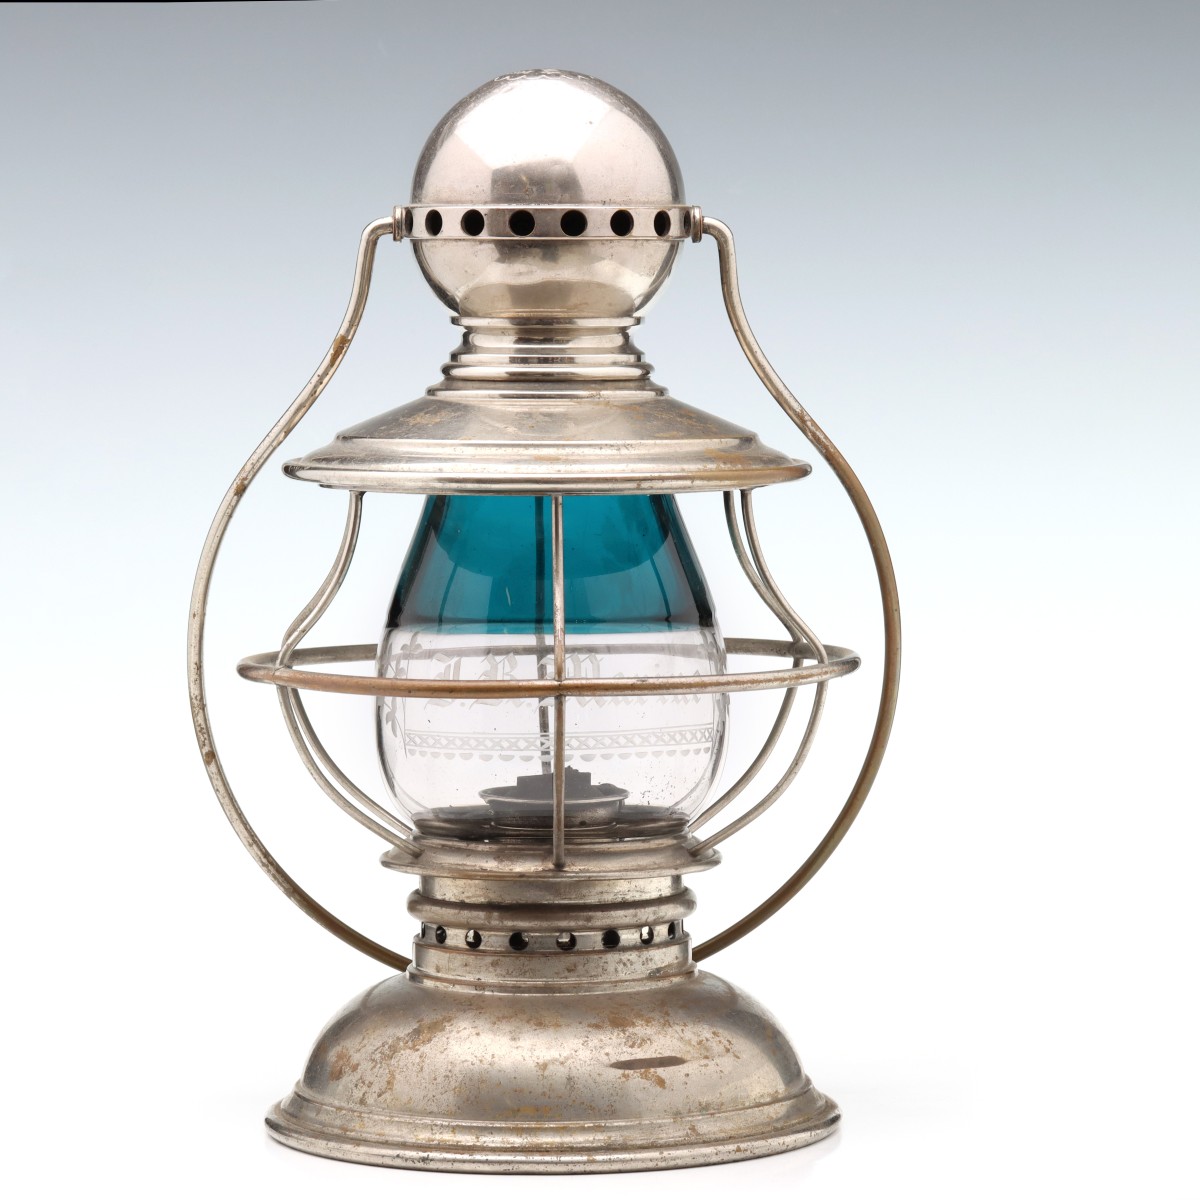 A PRESENTATION LANTERN WITH TEAL BLUE OVER CLEAR GLOBE